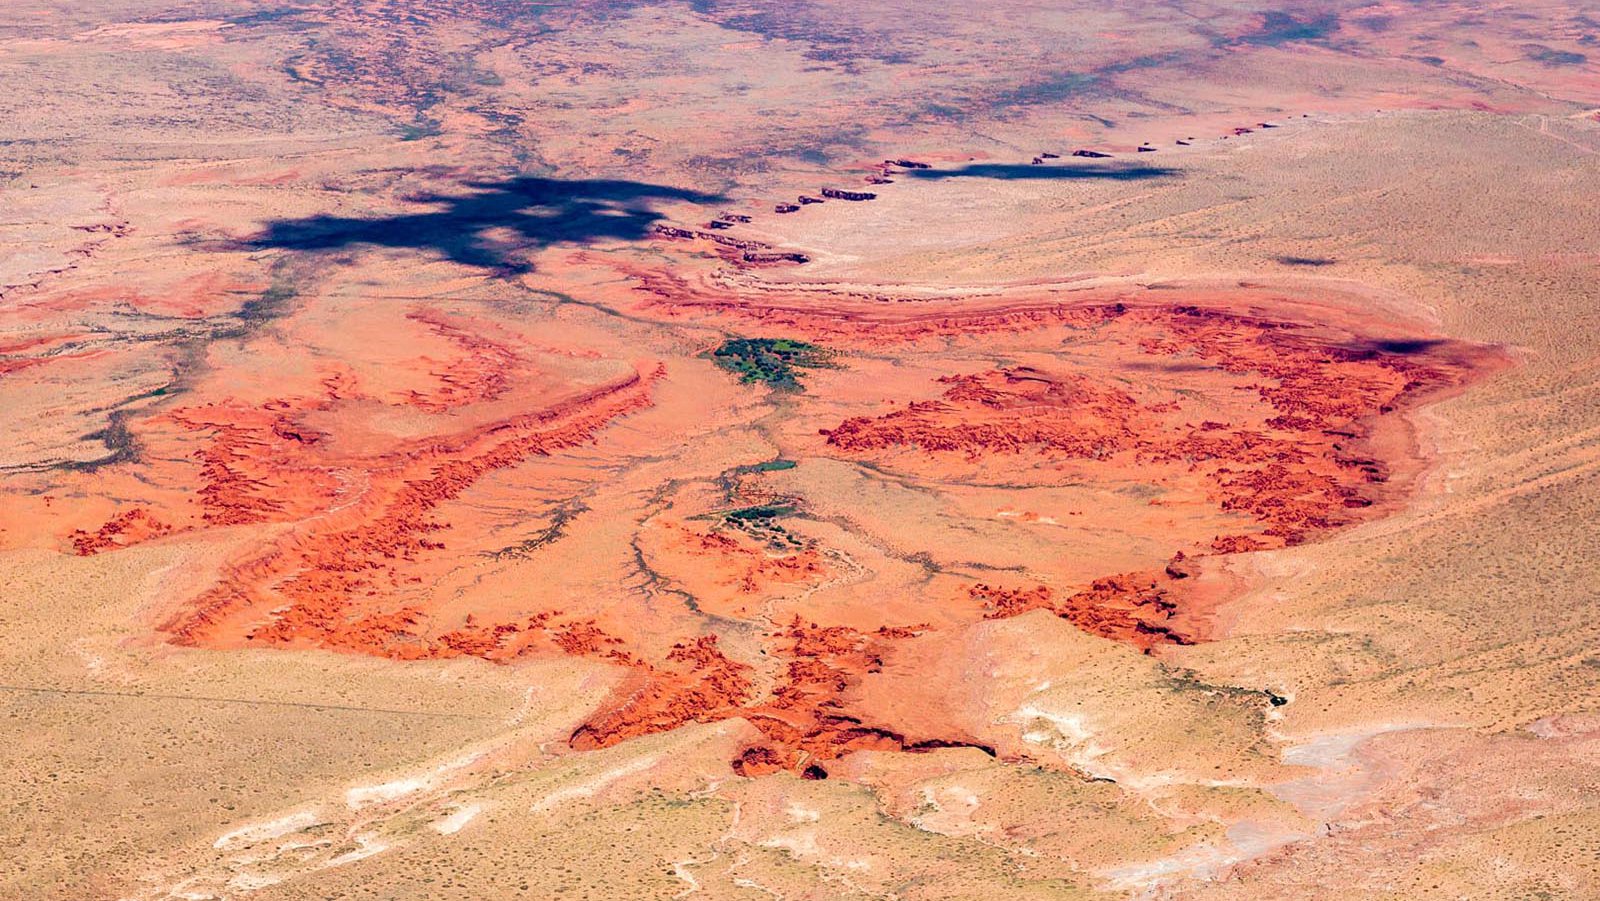 Blog image 0510 of the vibrant red earth layers in the Navajo Nation